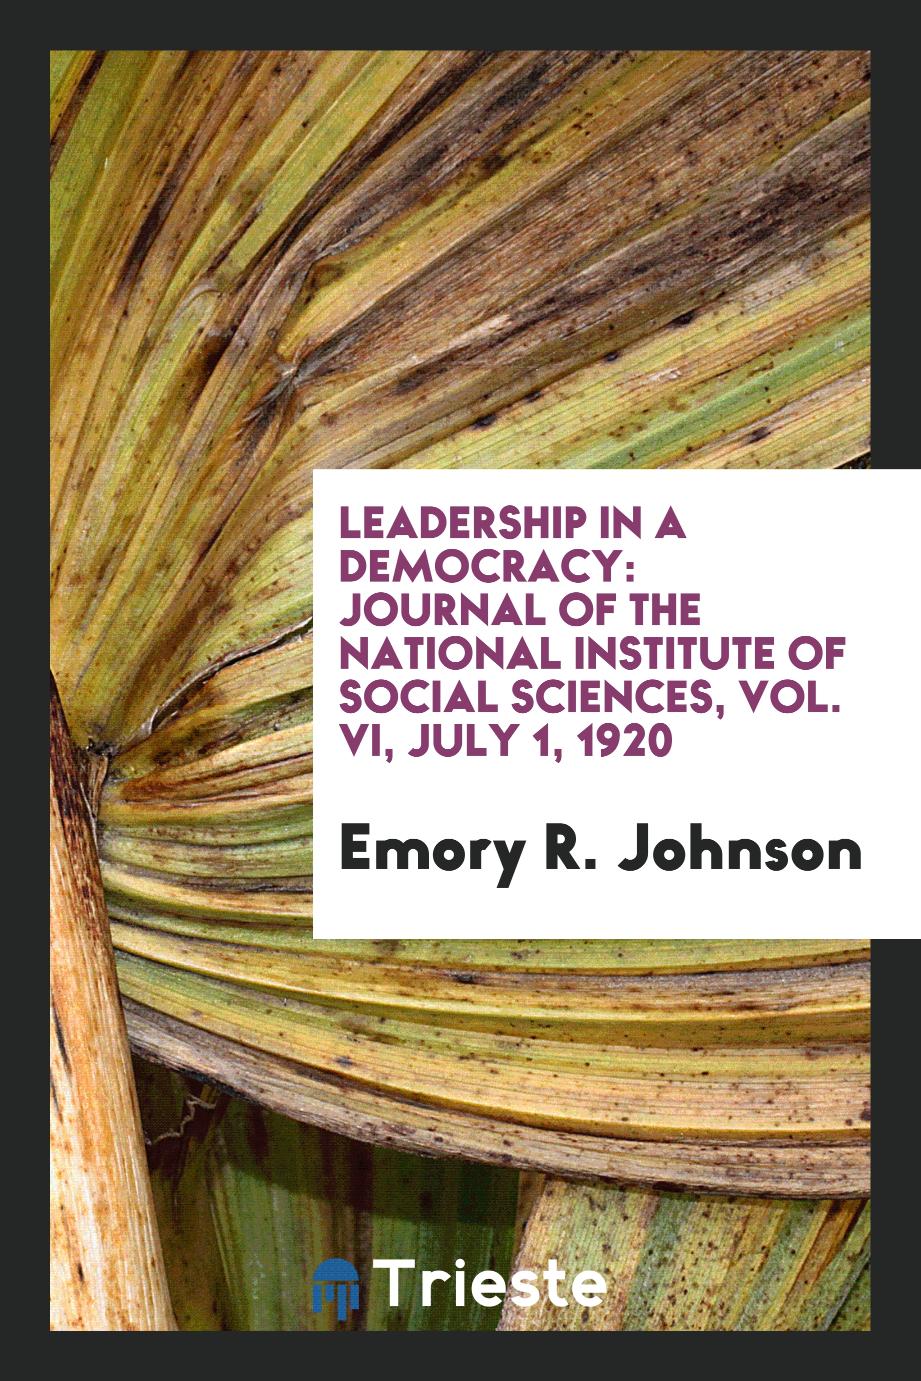 Leadership in a Democracy: Journal of the National Institute of Social Sciences, Vol. VI, July 1, 1920